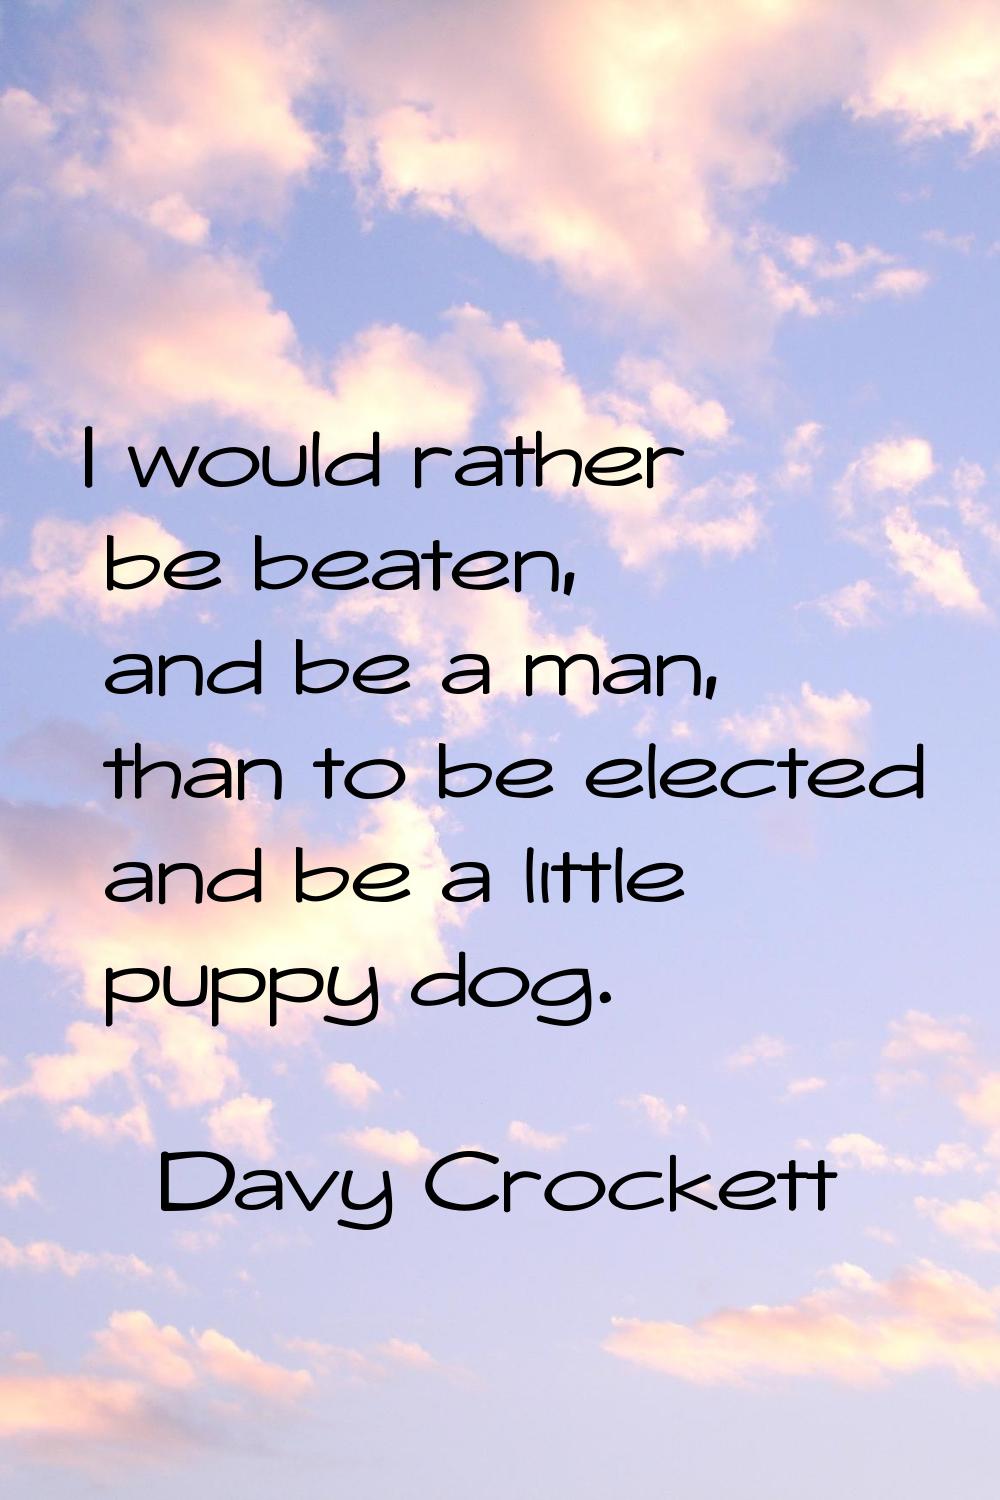 I would rather be beaten, and be a man, than to be elected and be a little puppy dog.